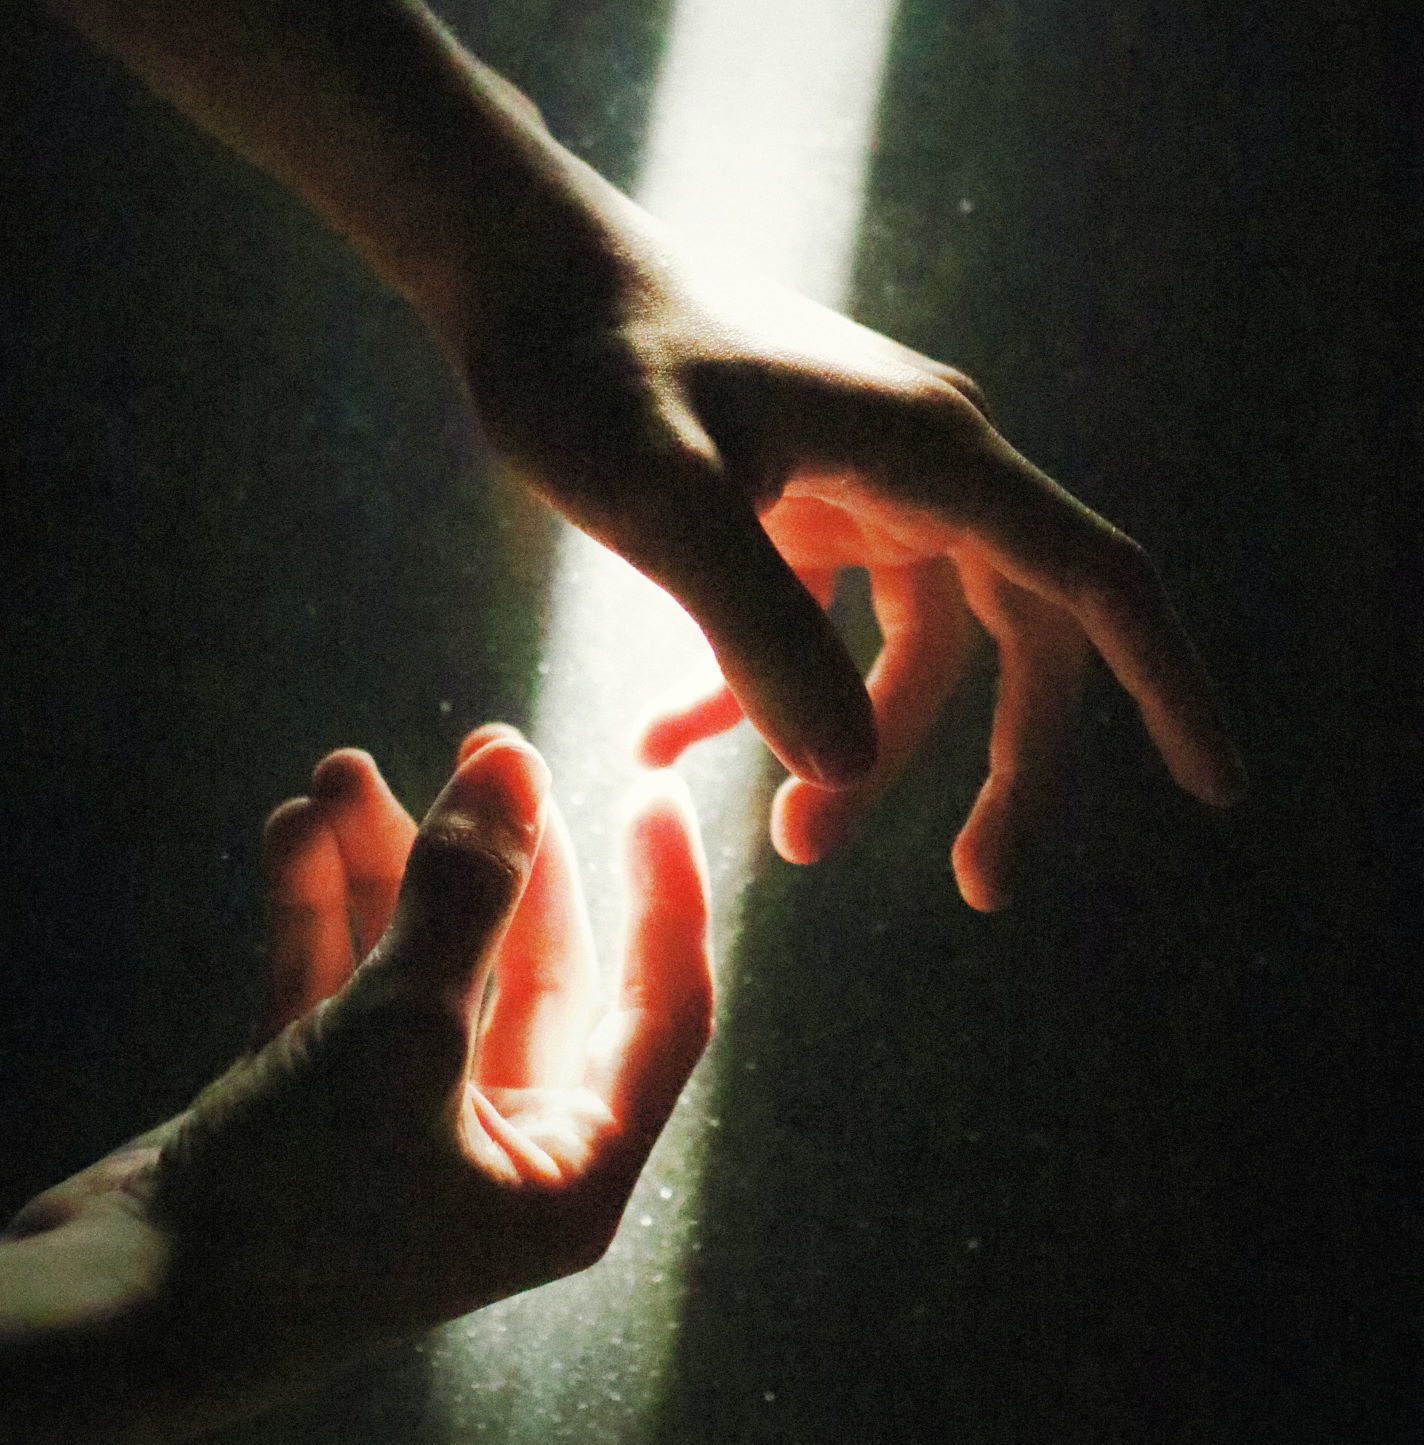 Two hands reaching for each other illuminated by a shaft of light.